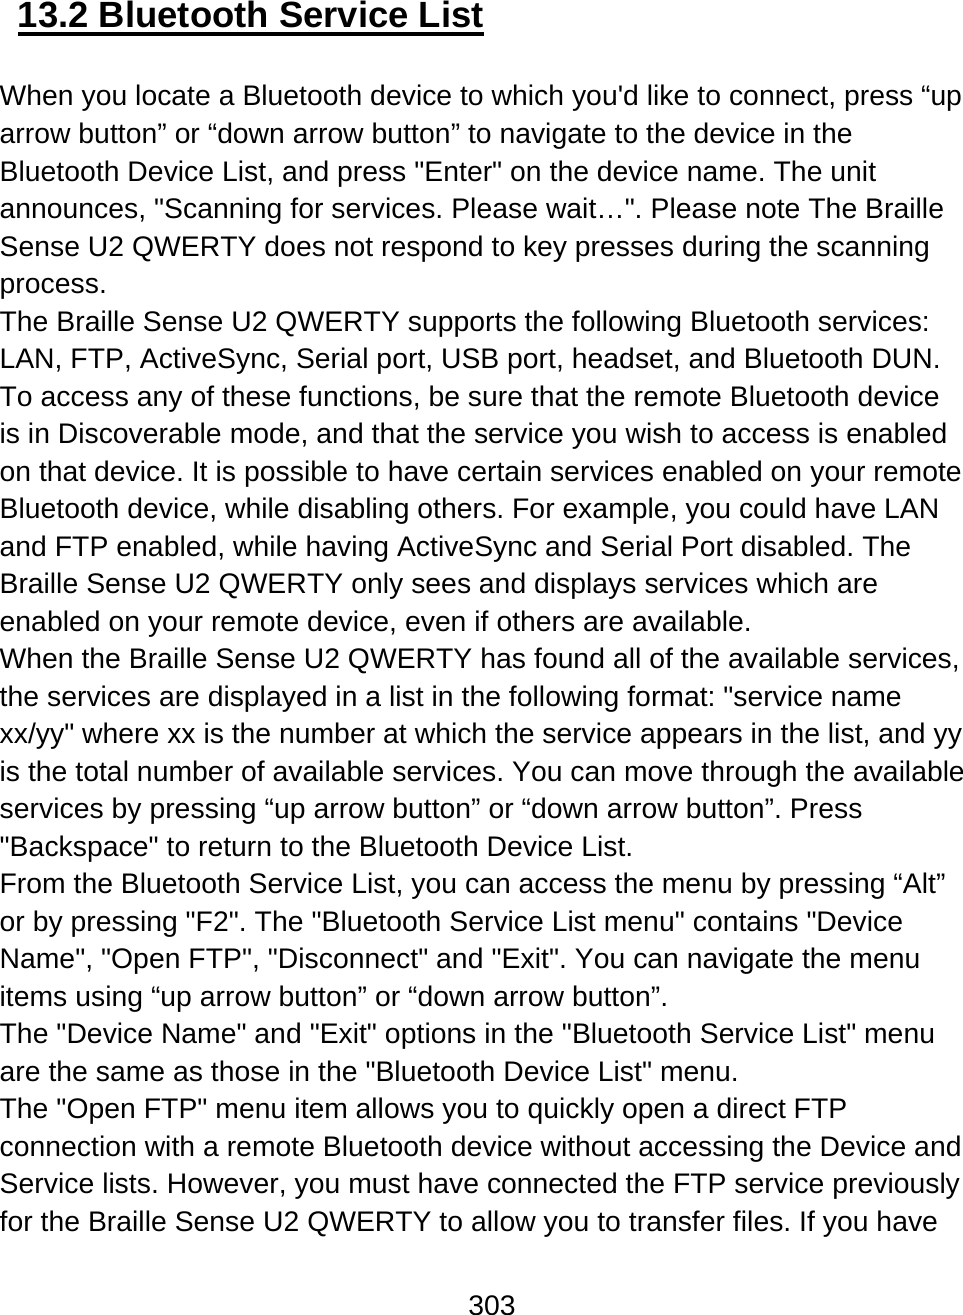 303  13.2 Bluetooth Service List  When you locate a Bluetooth device to which you&apos;d like to connect, press “up arrow button” or “down arrow button” to navigate to the device in the Bluetooth Device List, and press &quot;Enter&quot; on the device name. The unit announces, &quot;Scanning for services. Please wait…&quot;. Please note The Braille Sense U2 QWERTY does not respond to key presses during the scanning process.  The Braille Sense U2 QWERTY supports the following Bluetooth services: LAN, FTP, ActiveSync, Serial port, USB port, headset, and Bluetooth DUN. To access any of these functions, be sure that the remote Bluetooth device is in Discoverable mode, and that the service you wish to access is enabled on that device. It is possible to have certain services enabled on your remote Bluetooth device, while disabling others. For example, you could have LAN and FTP enabled, while having ActiveSync and Serial Port disabled. The Braille Sense U2 QWERTY only sees and displays services which are enabled on your remote device, even if others are available.  When the Braille Sense U2 QWERTY has found all of the available services, the services are displayed in a list in the following format: &quot;service name xx/yy&quot; where xx is the number at which the service appears in the list, and yy is the total number of available services. You can move through the available services by pressing “up arrow button” or “down arrow button”. Press &quot;Backspace&quot; to return to the Bluetooth Device List. From the Bluetooth Service List, you can access the menu by pressing “Alt” or by pressing &quot;F2&quot;. The &quot;Bluetooth Service List menu&quot; contains &quot;Device Name&quot;, &quot;Open FTP&quot;, &quot;Disconnect&quot; and &quot;Exit&quot;. You can navigate the menu items using “up arrow button” or “down arrow button”. The &quot;Device Name&quot; and &quot;Exit&quot; options in the &quot;Bluetooth Service List&quot; menu are the same as those in the &quot;Bluetooth Device List&quot; menu.  The &quot;Open FTP&quot; menu item allows you to quickly open a direct FTP connection with a remote Bluetooth device without accessing the Device and Service lists. However, you must have connected the FTP service previously for the Braille Sense U2 QWERTY to allow you to transfer files. If you have 